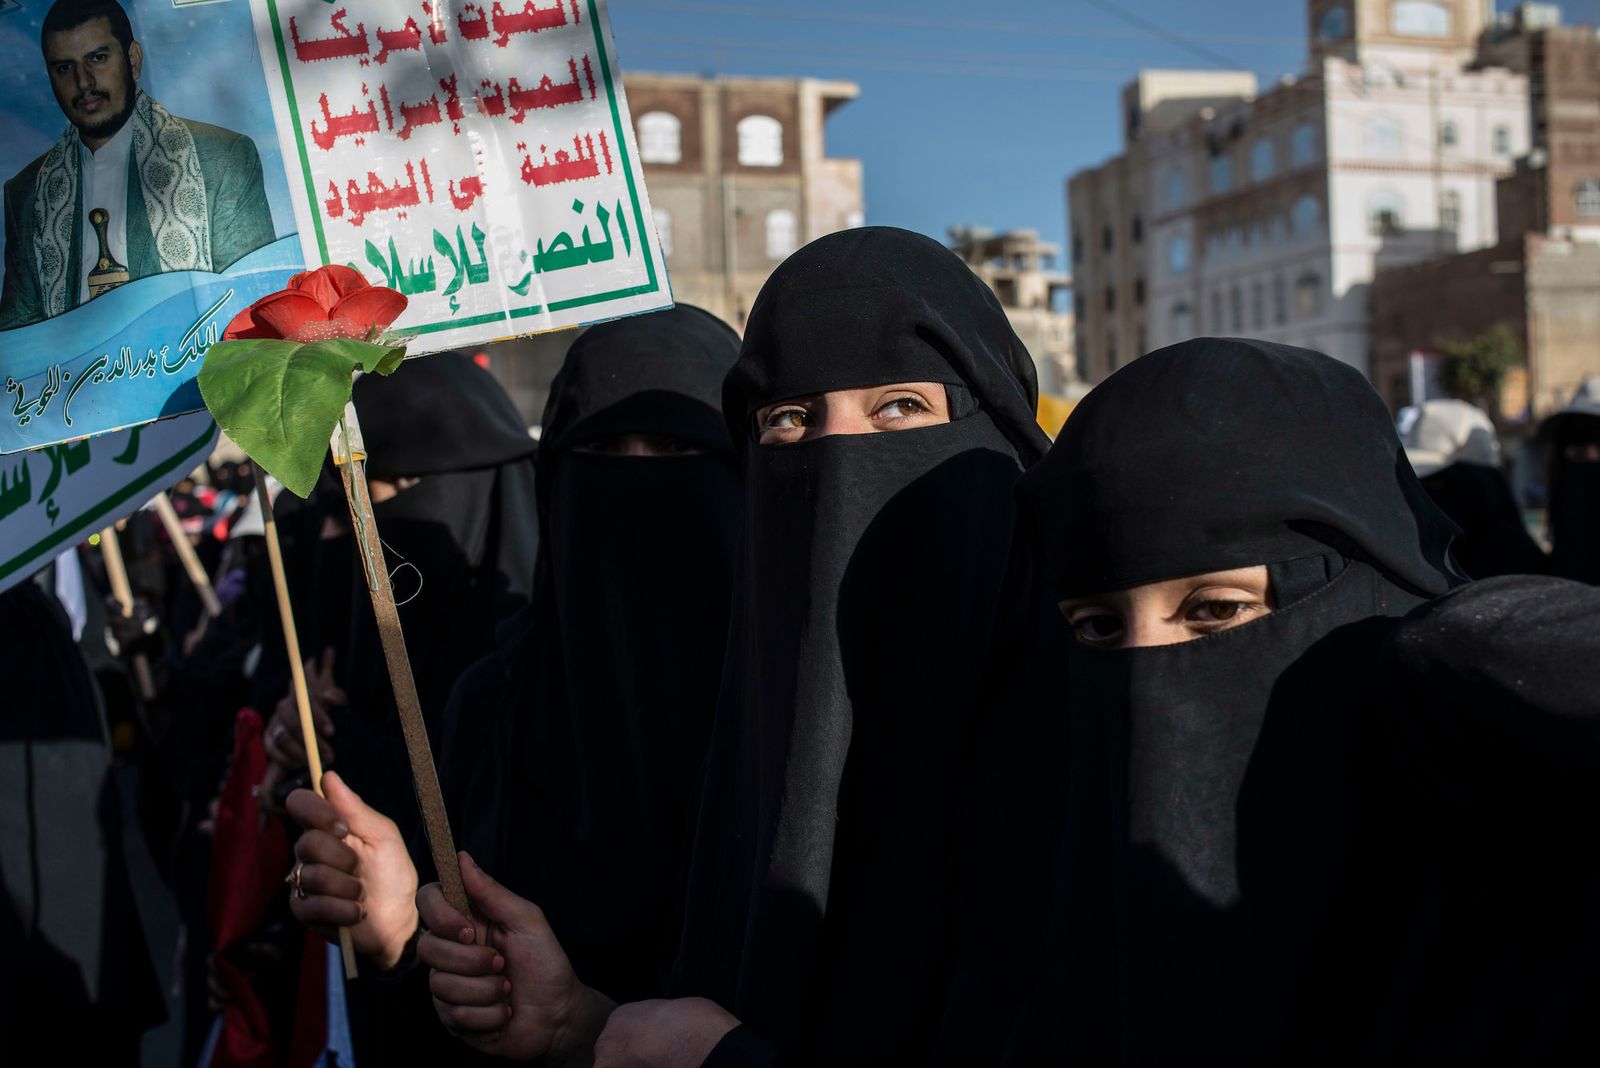 © Alex Potter - Yemeni women gather at a female-only protest to support the Houthis "People's Revolution".